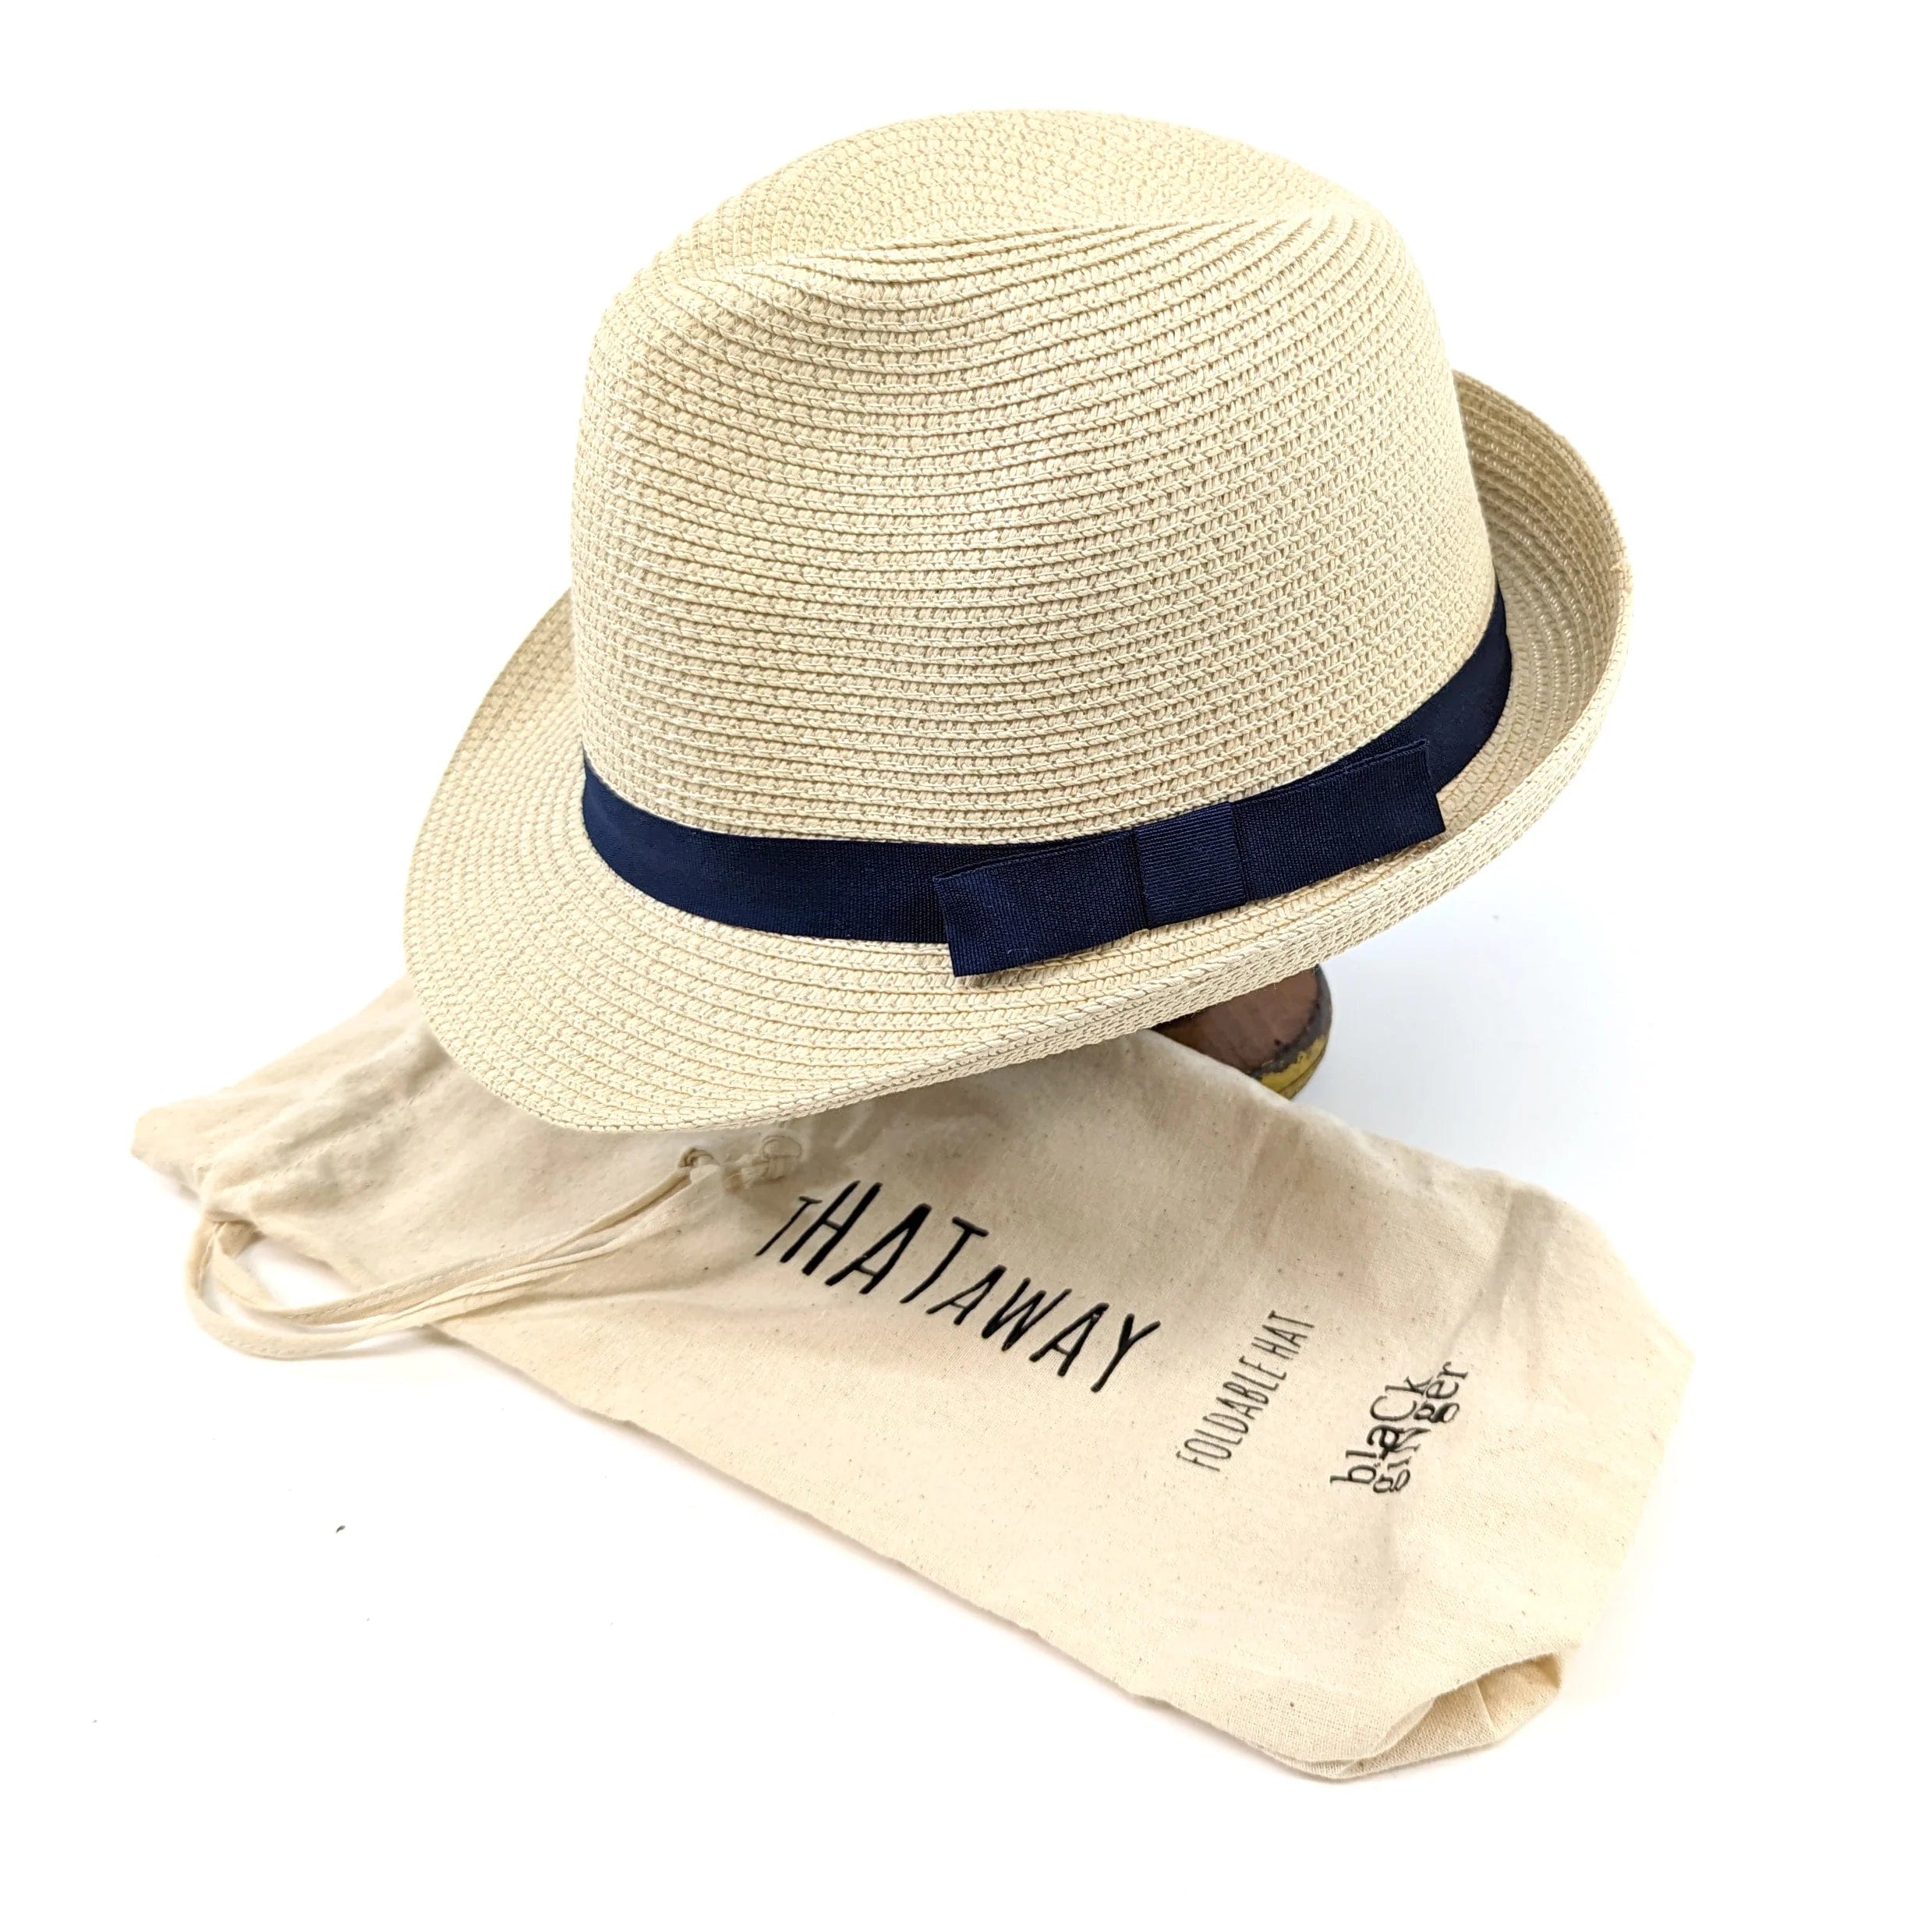 Unisex Trilby Style Sun Hat With Black Band , Foldable And Packable.